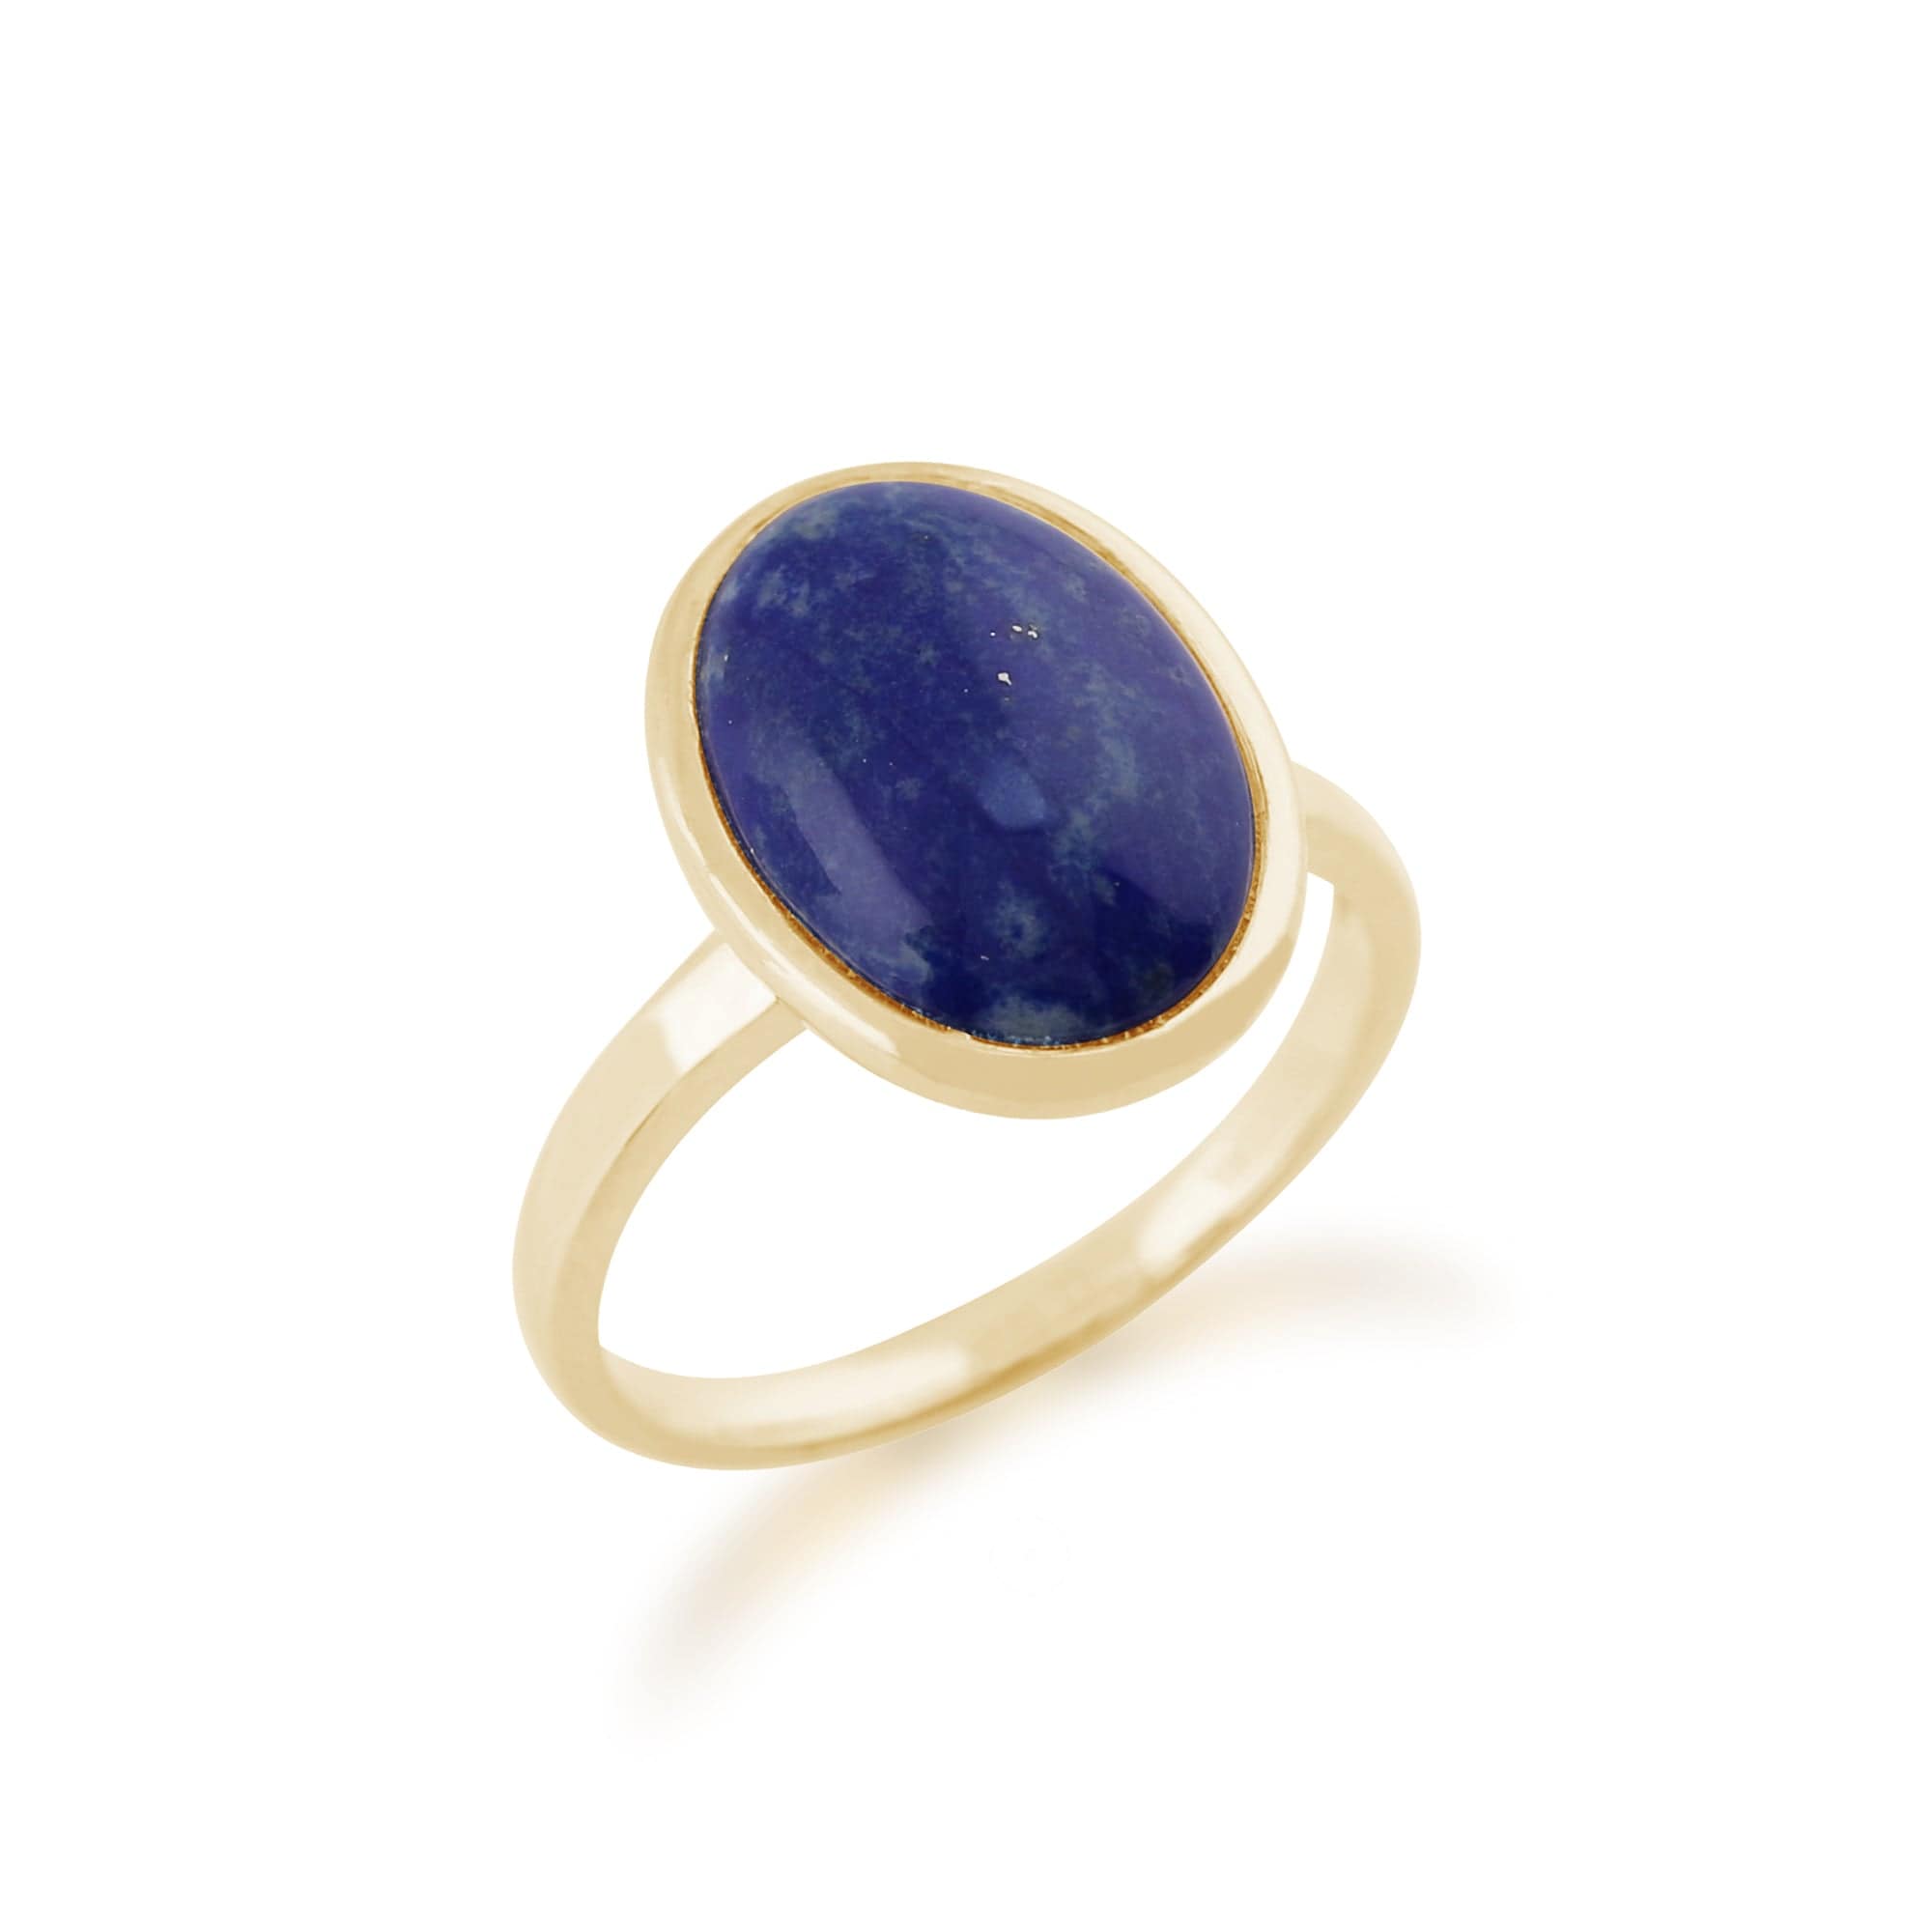 Statement Oval Lapis Lazuli Ring in 9ct Yellow Gold